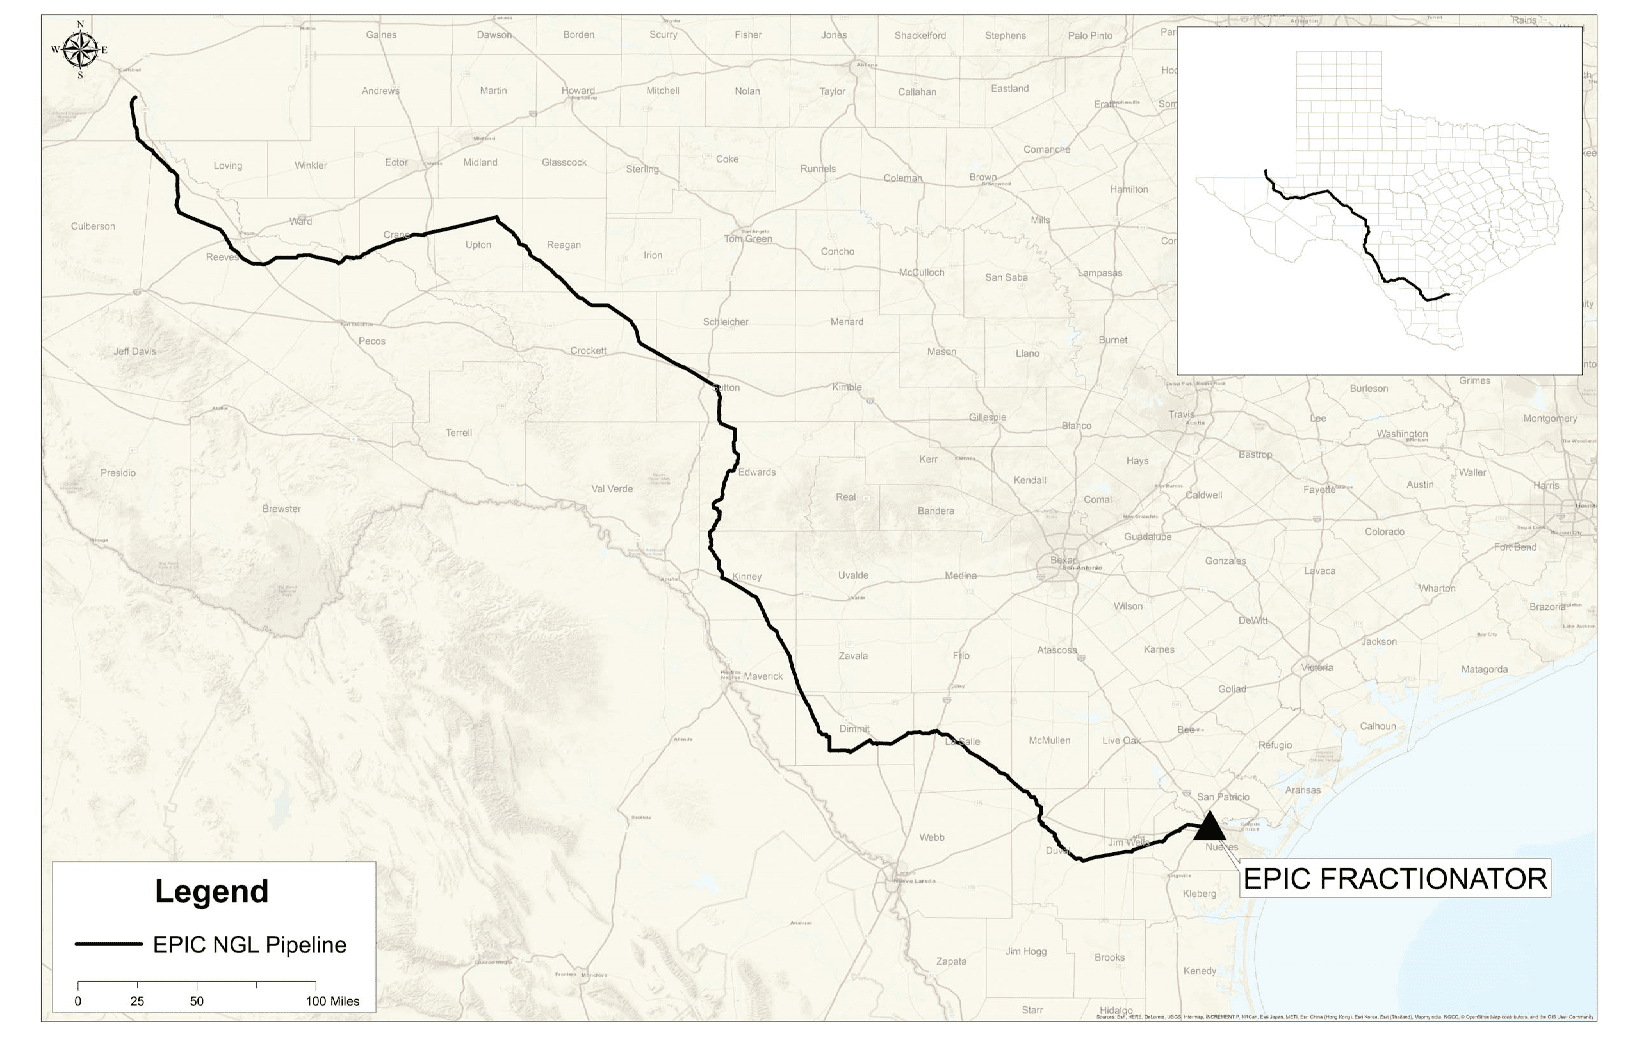 Epic Pipeline Announces Capacity Agreement With BP Energy Company For New 650-Mile NGL Pipeline From The Permian Basin To Corpus Christi